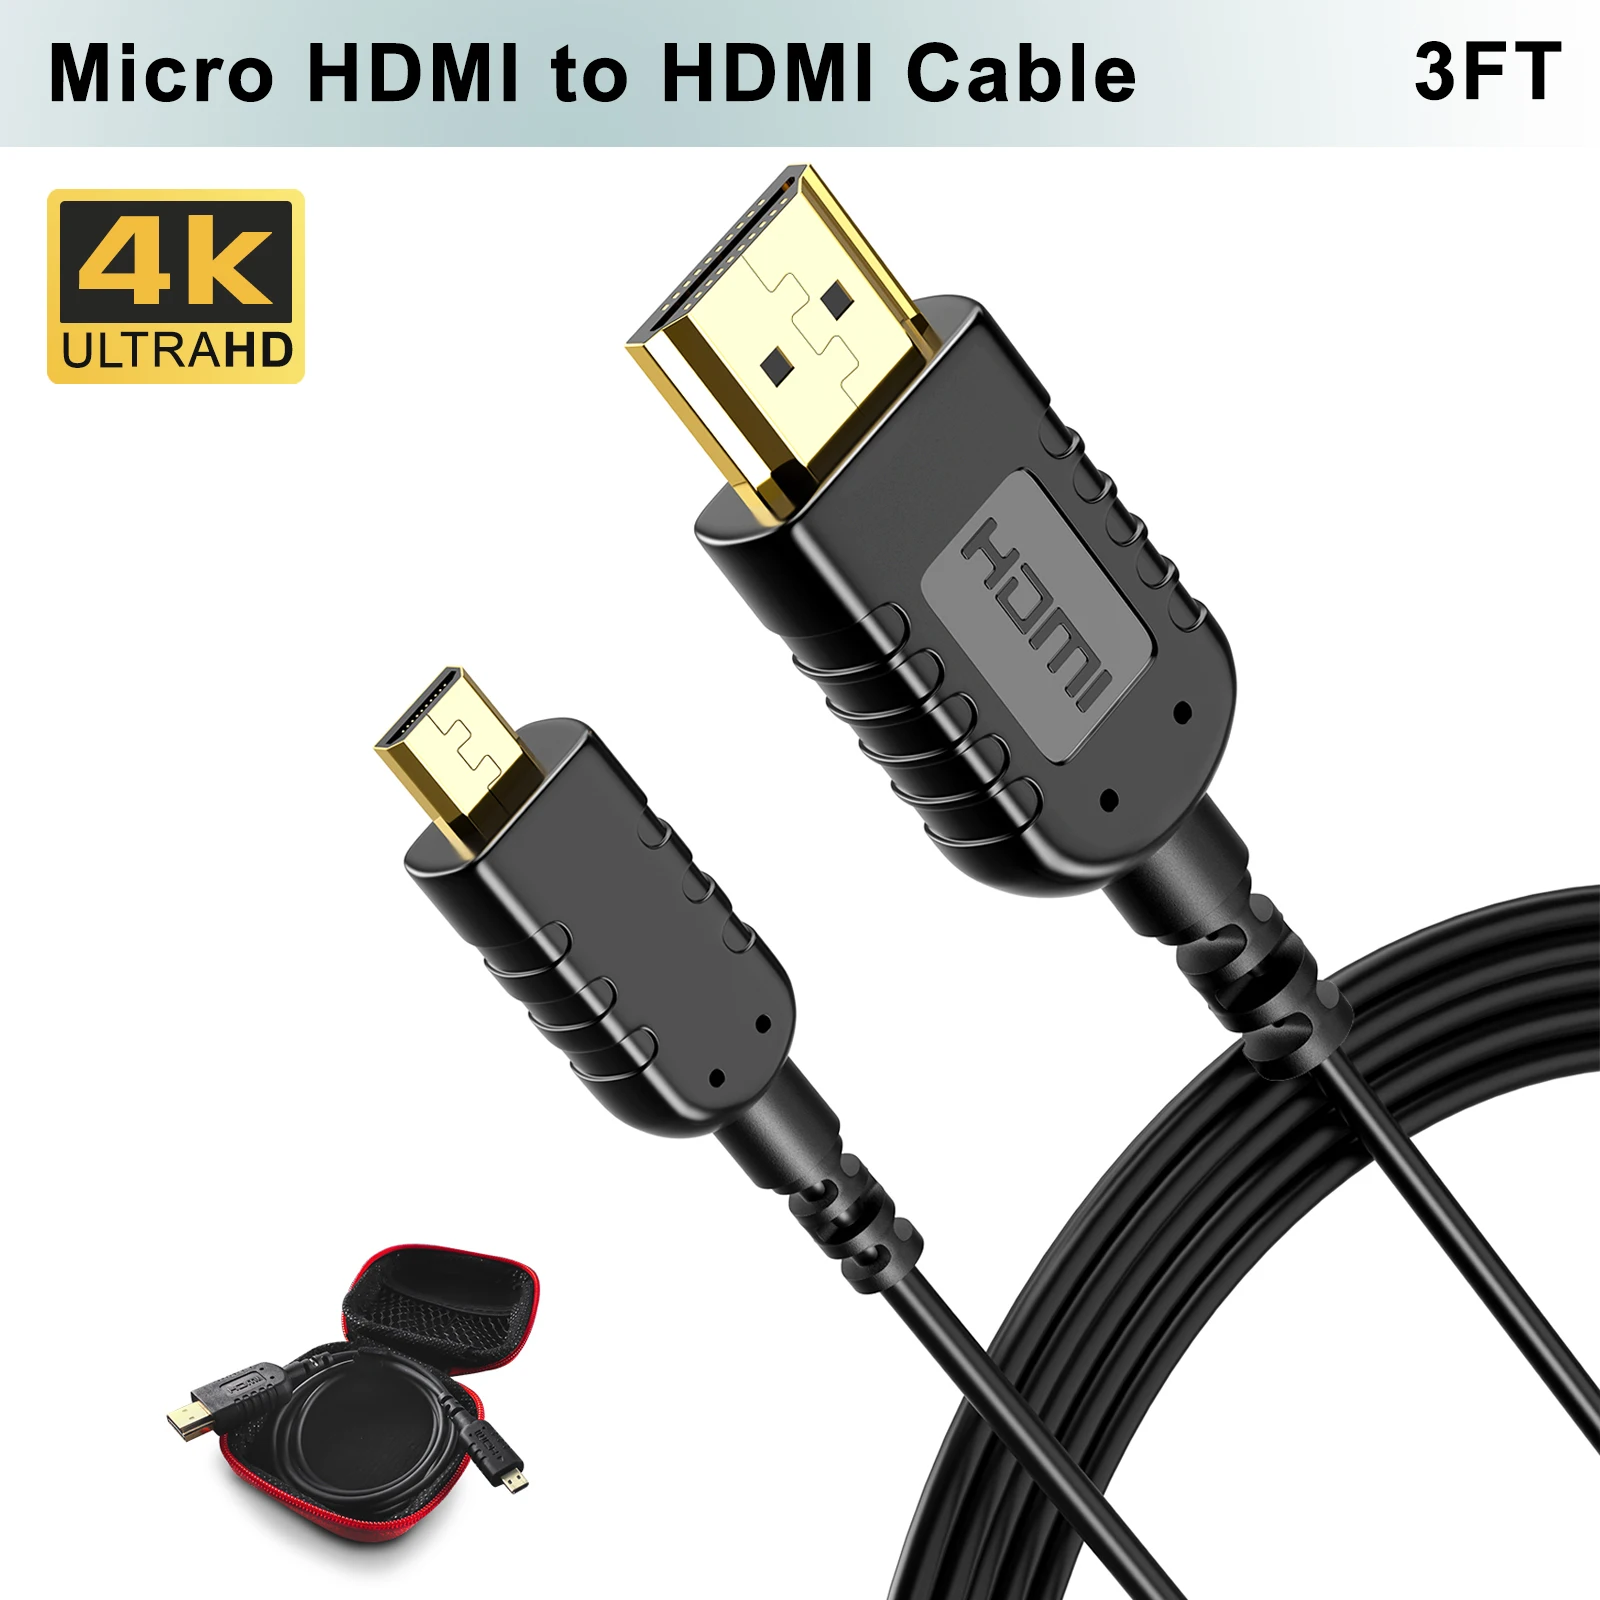 FOINNEX Ultra Thin Flexible Micro HDMI to HDMI Cable 3FT for Gimbal GoPro Hero 7 Black,Canon Camera, Stabilizer